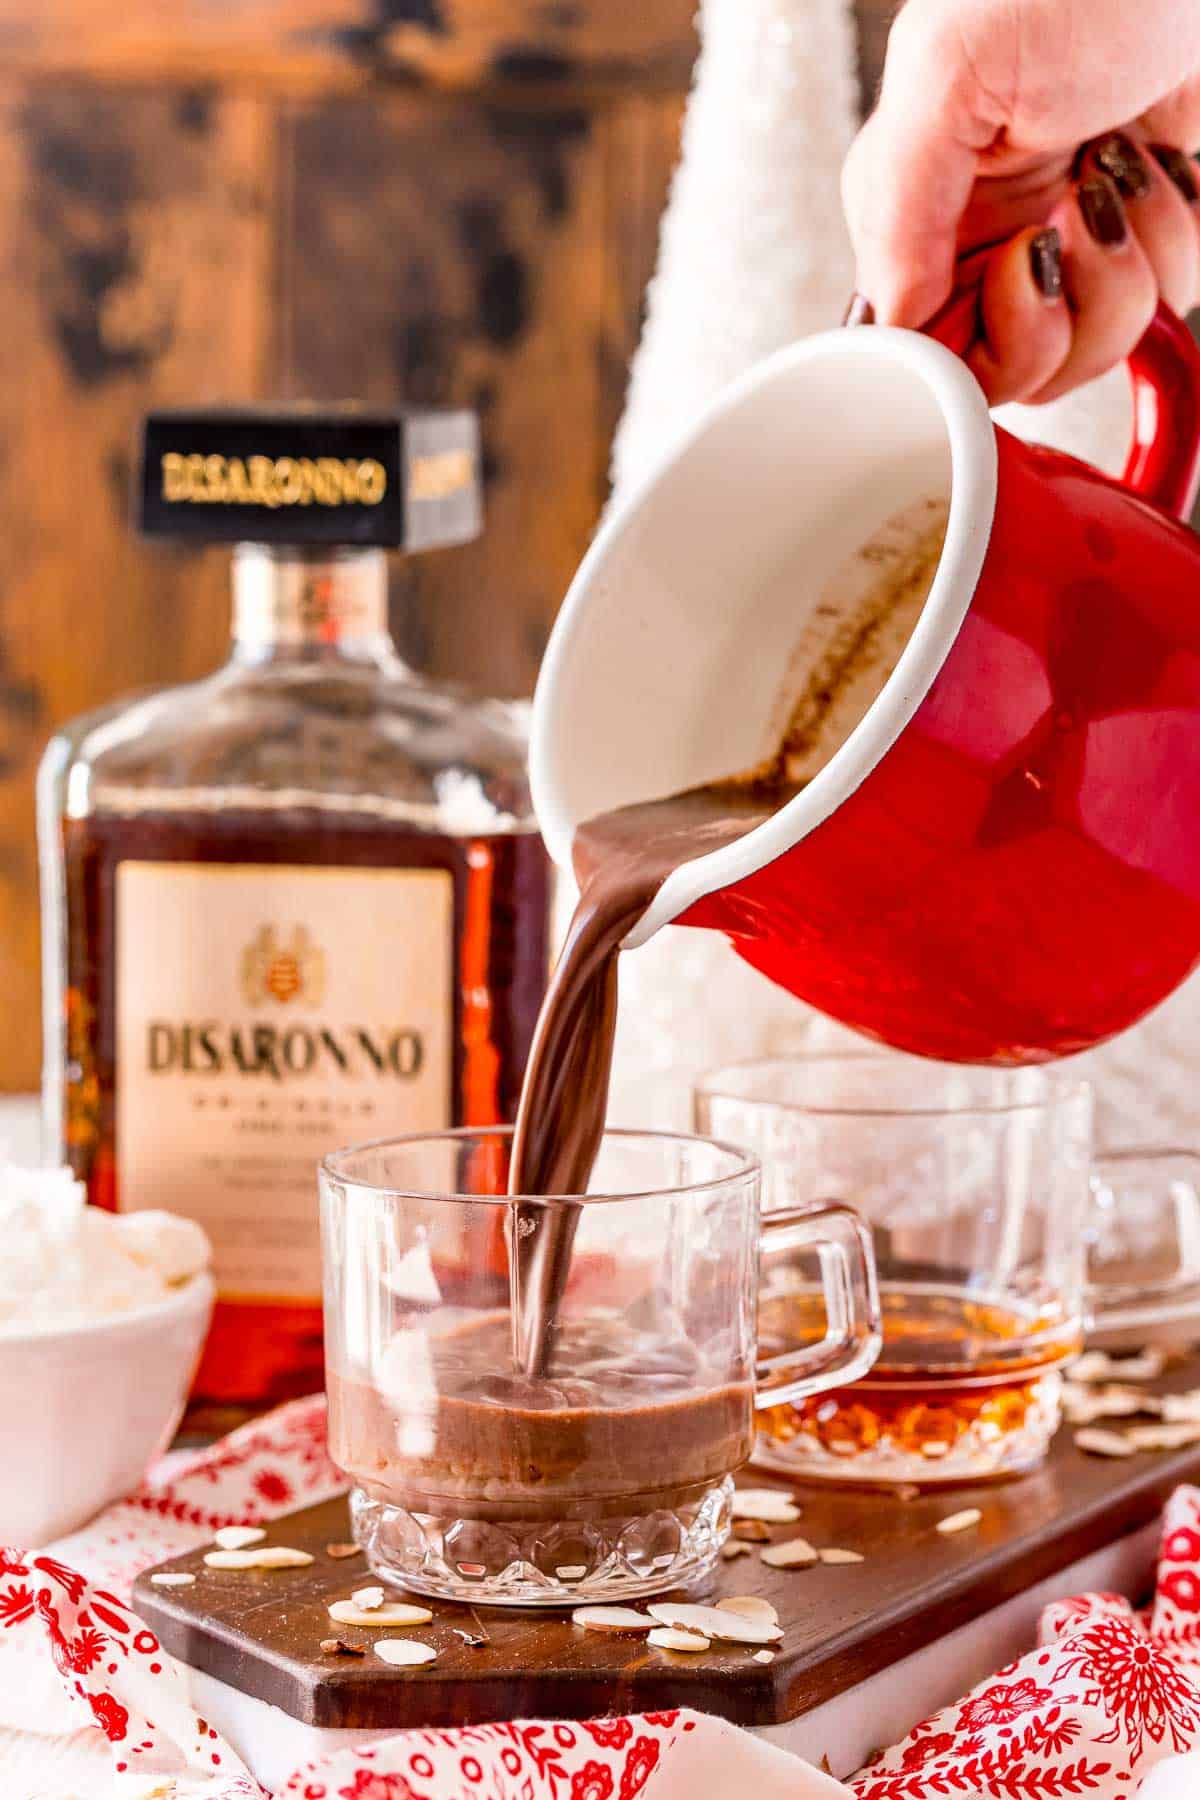 Hot cocoa being poured into a mug.